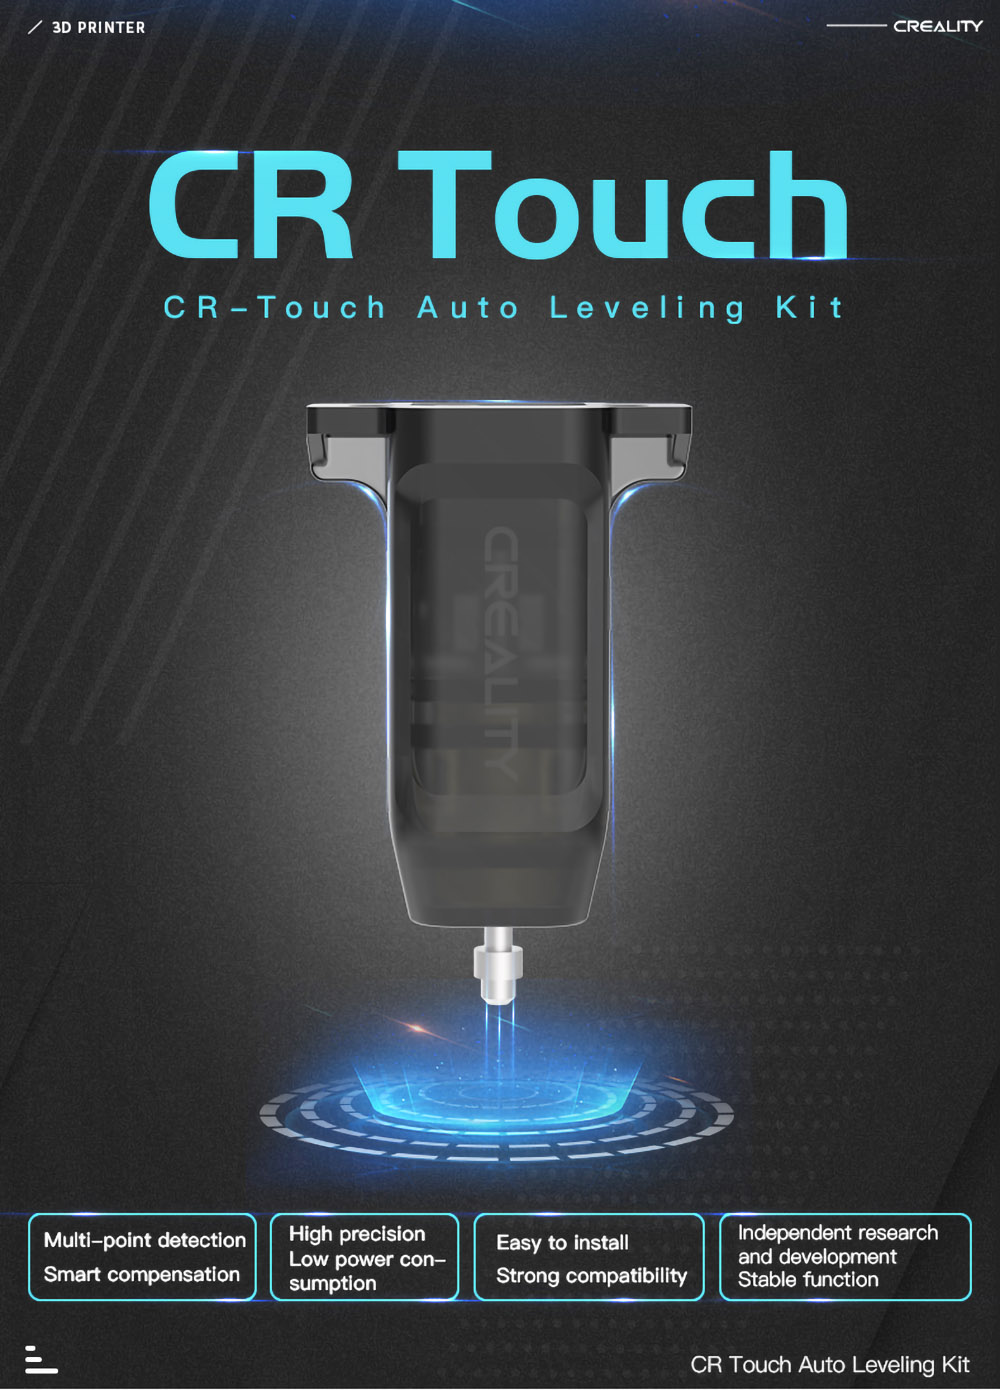 Creality CR Touch Auto Leveling Standard Kit for Most FDM 3D Printers, Electromagnetic Components + Photoelectric Sensor